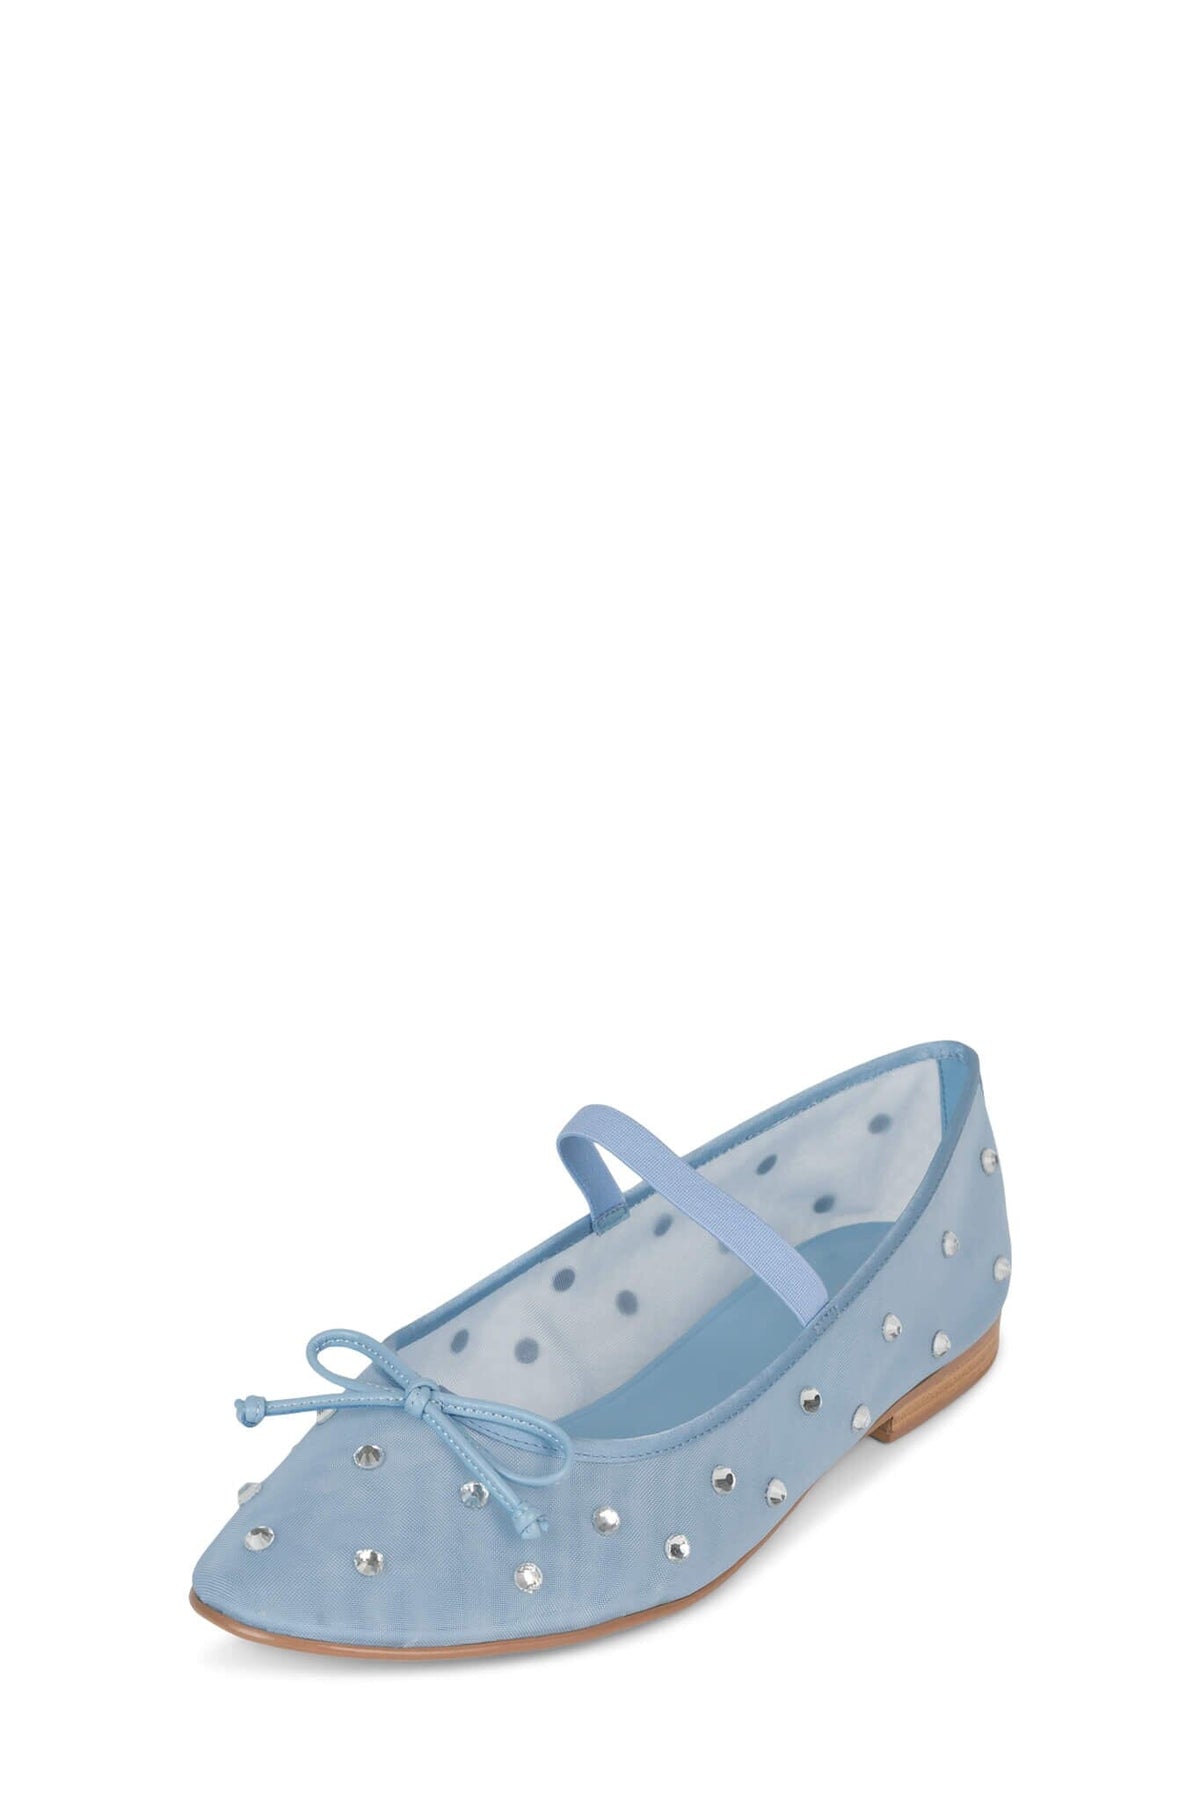 RELEVE-MJJ Jeffrey Campbell Mary Jane Mesh Flat Baby Blue Clear 